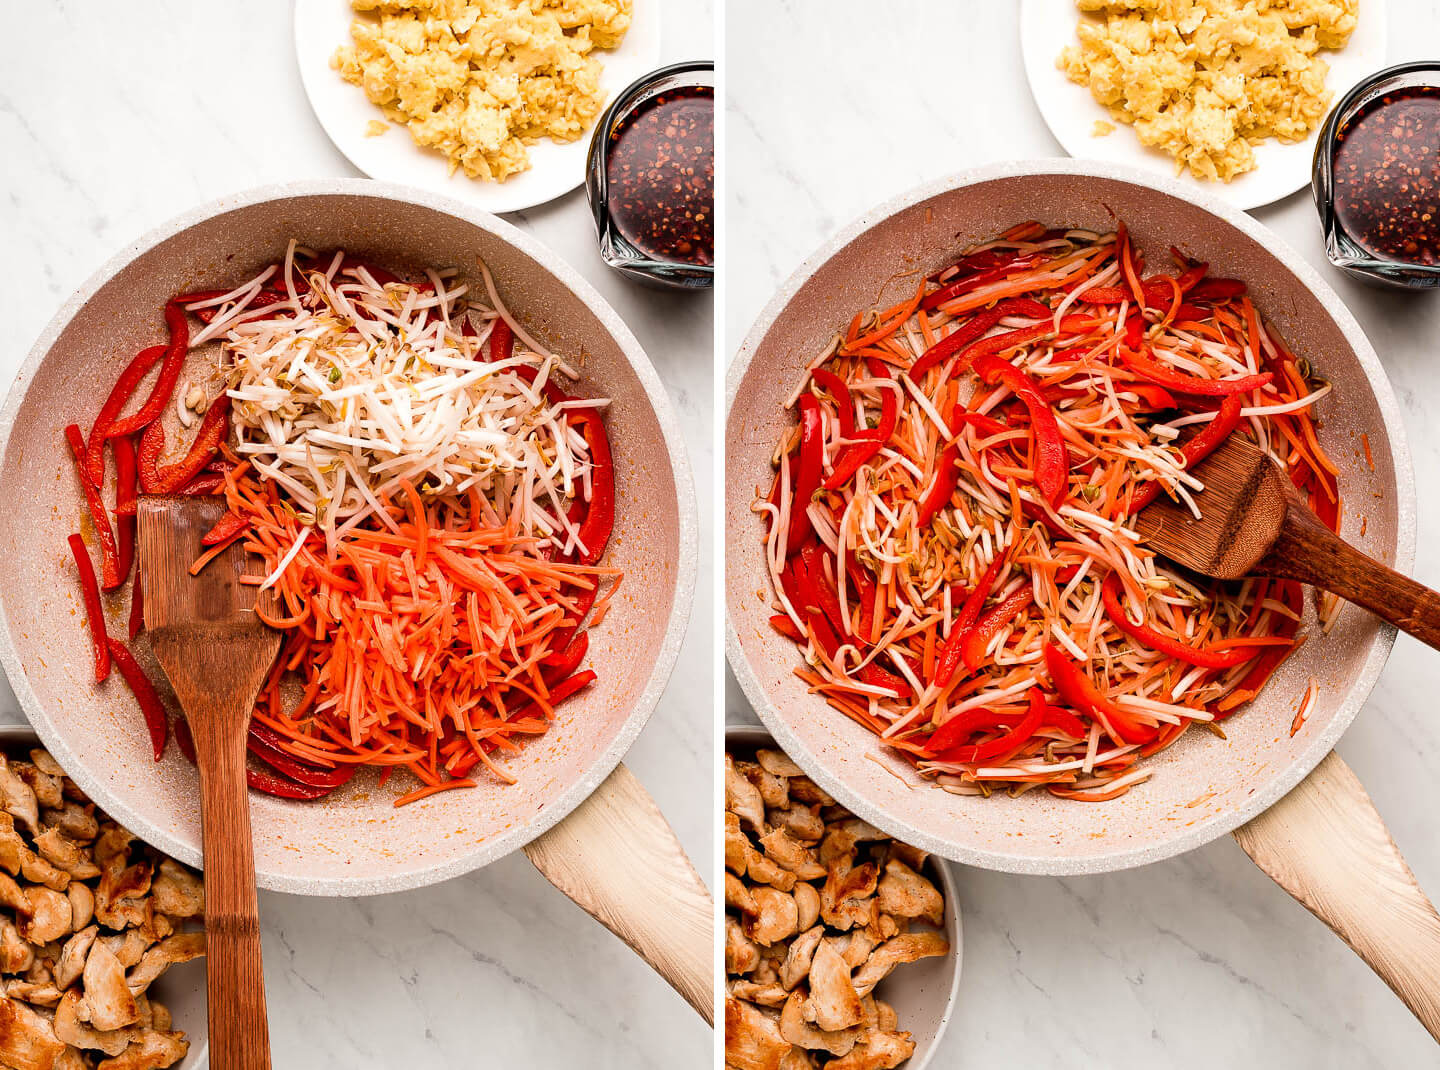 Diptych- Skillet with red peppers, shredded carrots, and bean sprouts; All mixed together.